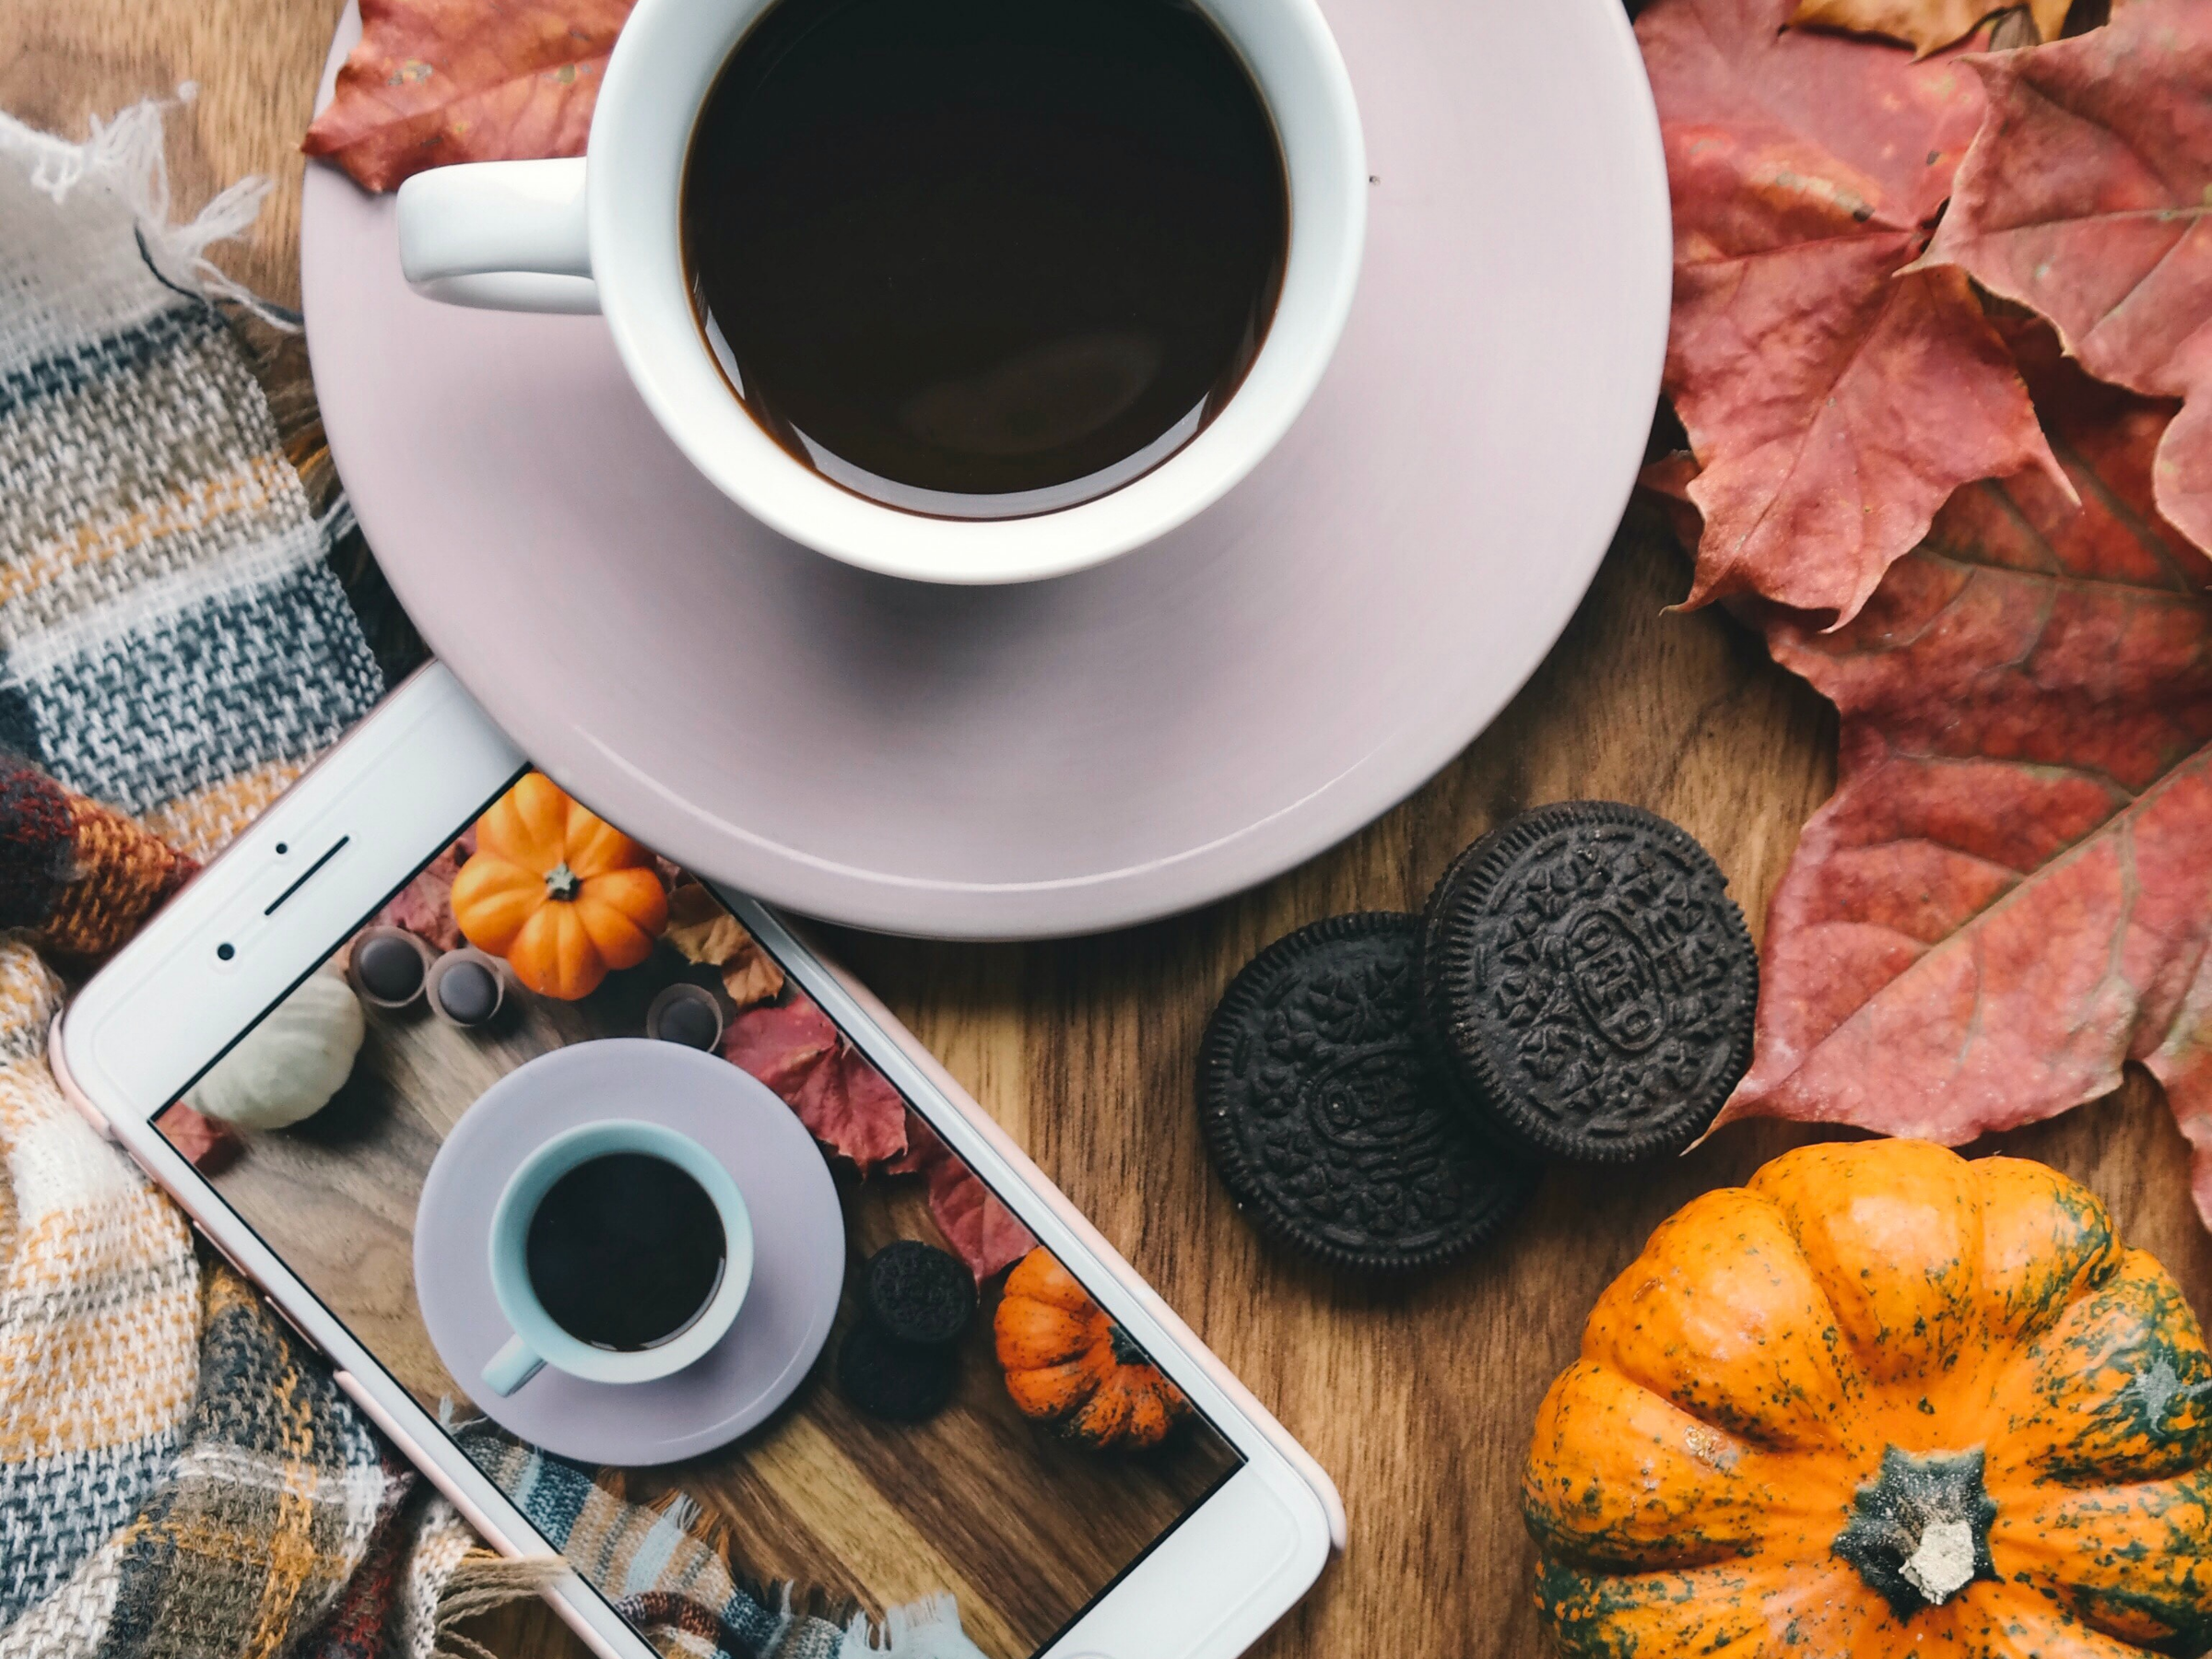 Fall Marketing That Makes a Cozy Connection